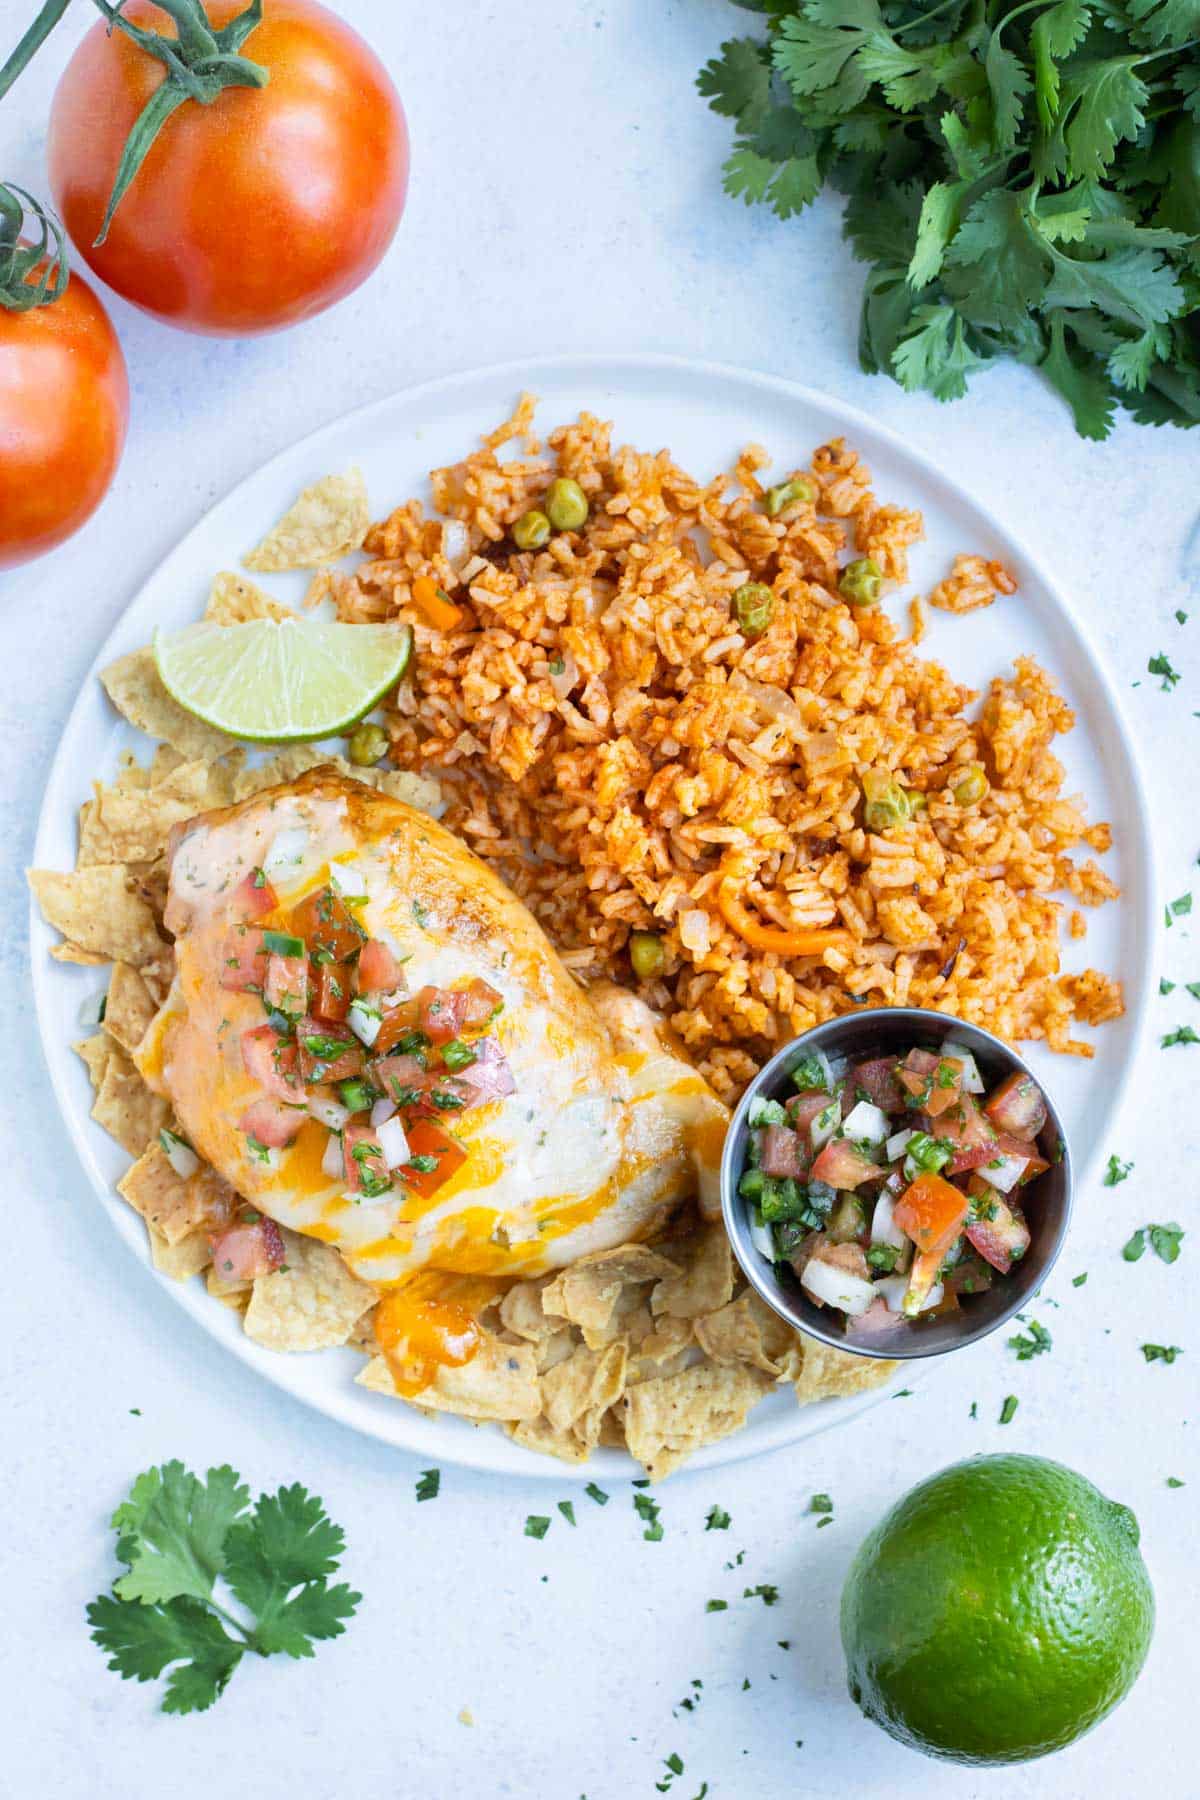 Fiesta lime rice is served with Mexican rice, fresh pico, and tortilla chips.